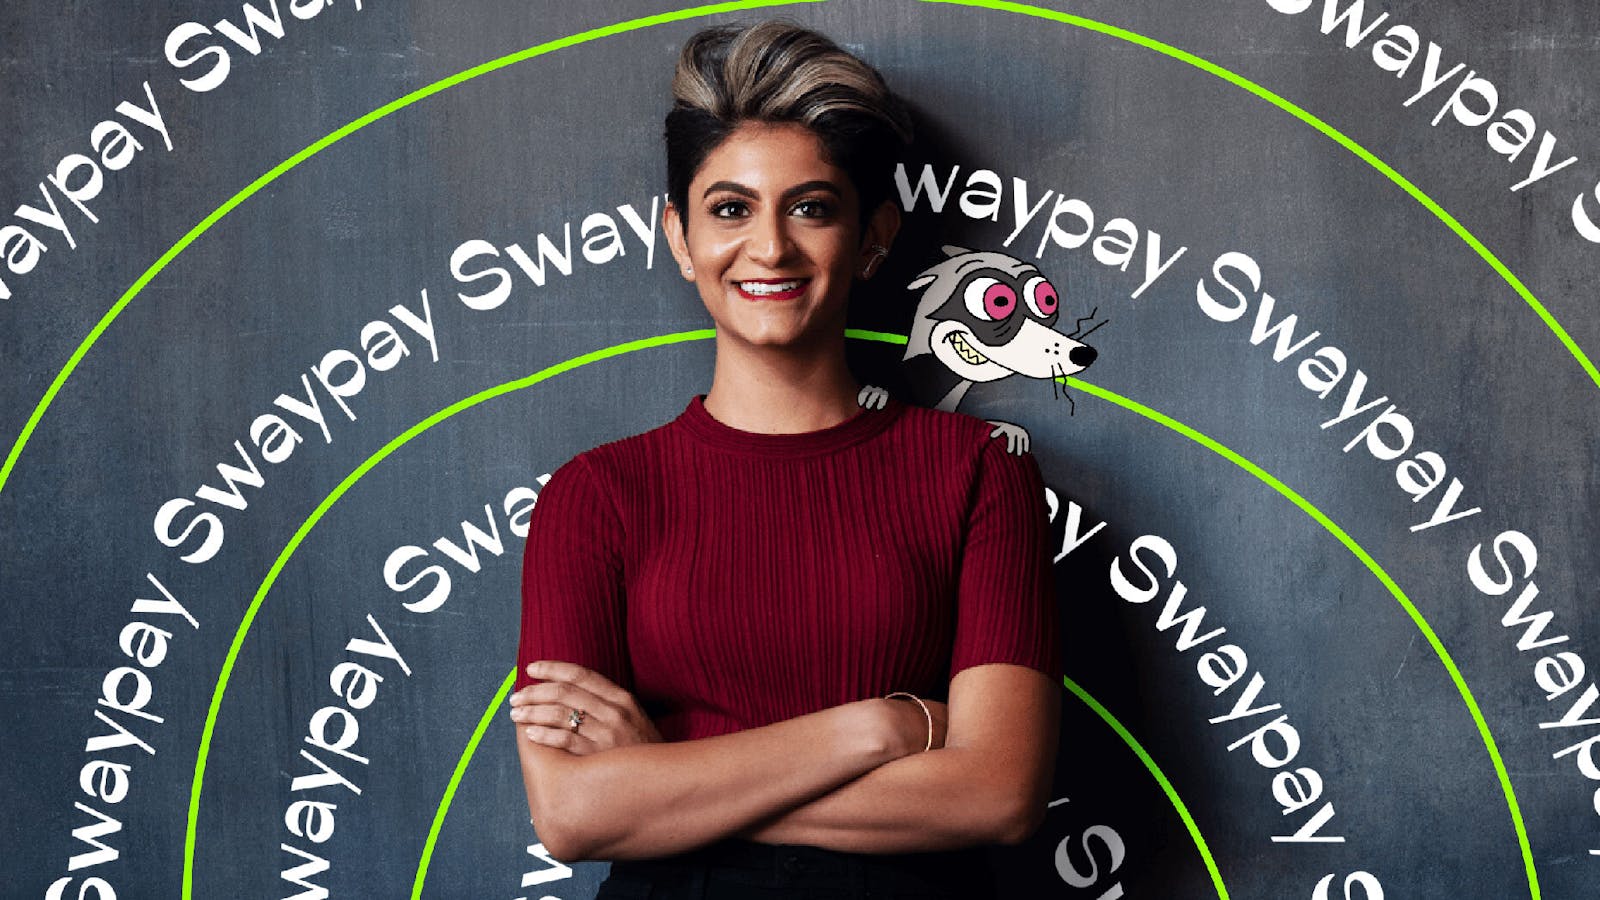 Kaeya Majmundar, co-founder and CEO of Swaypay. Credit: Michael Schacht 